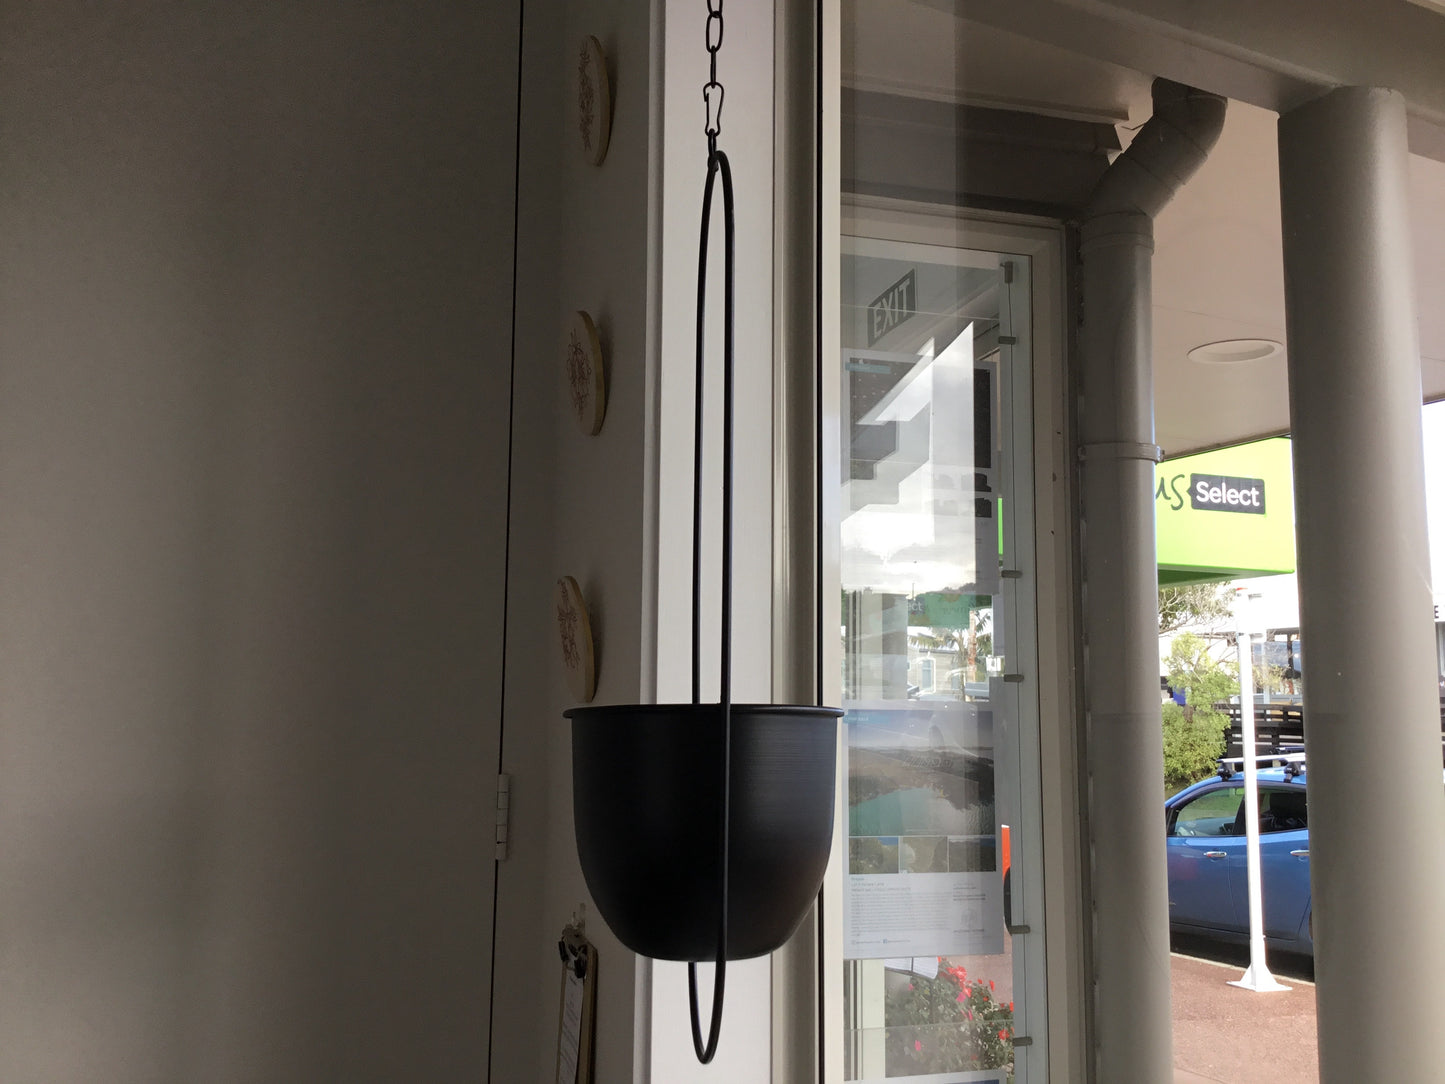 Hanging planter (without plant)